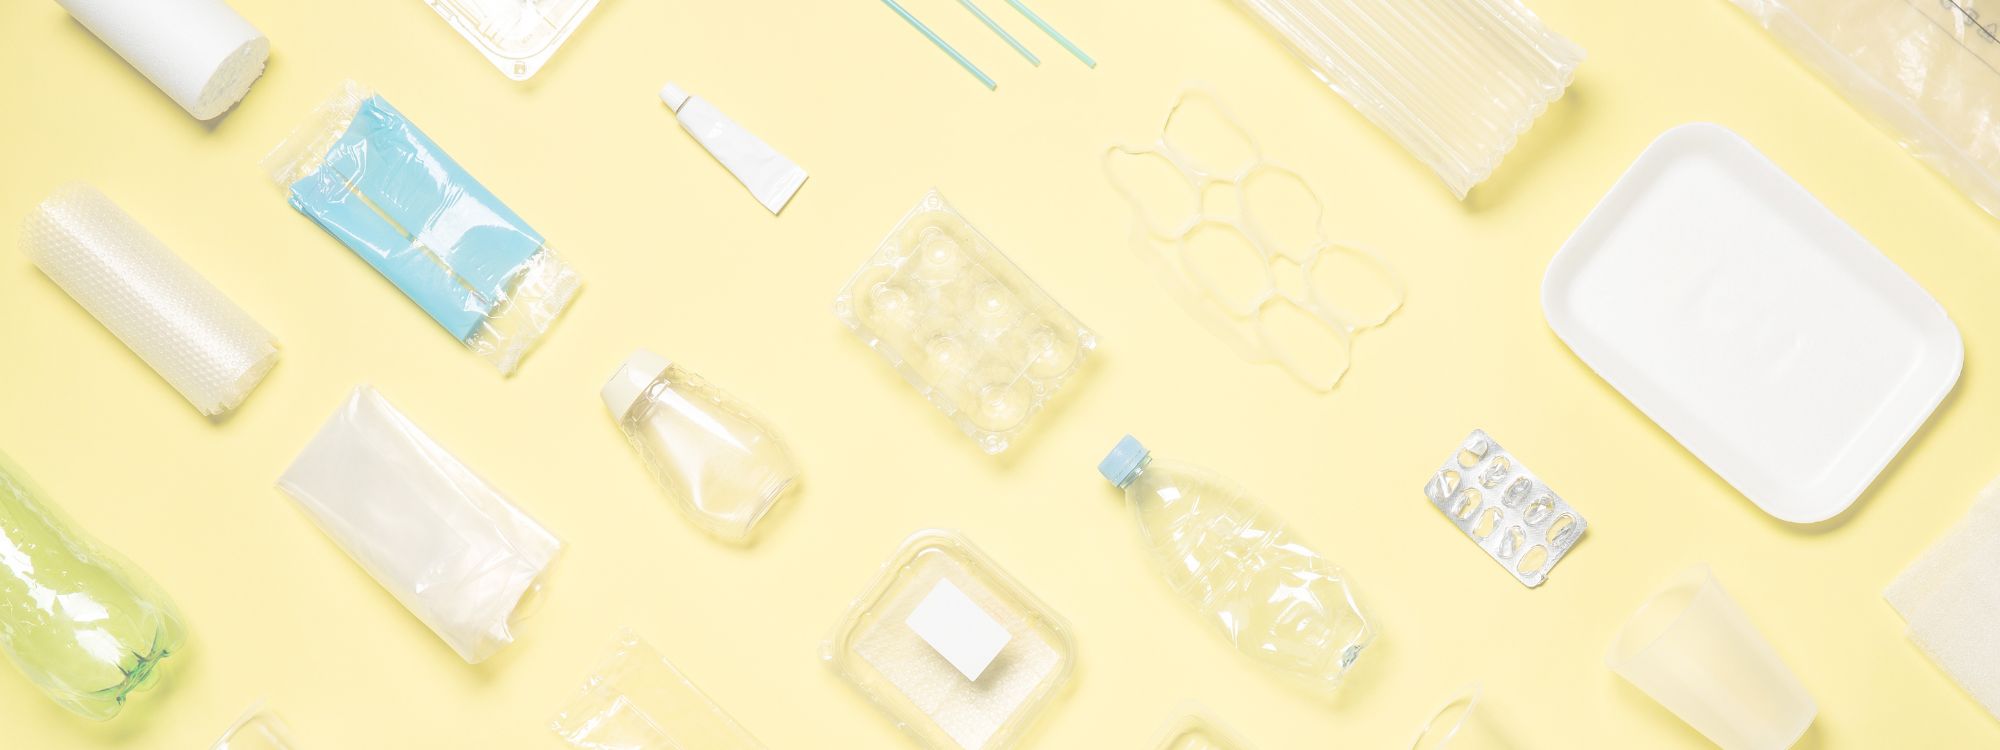 assorted types of single-use plastic packages and bottles